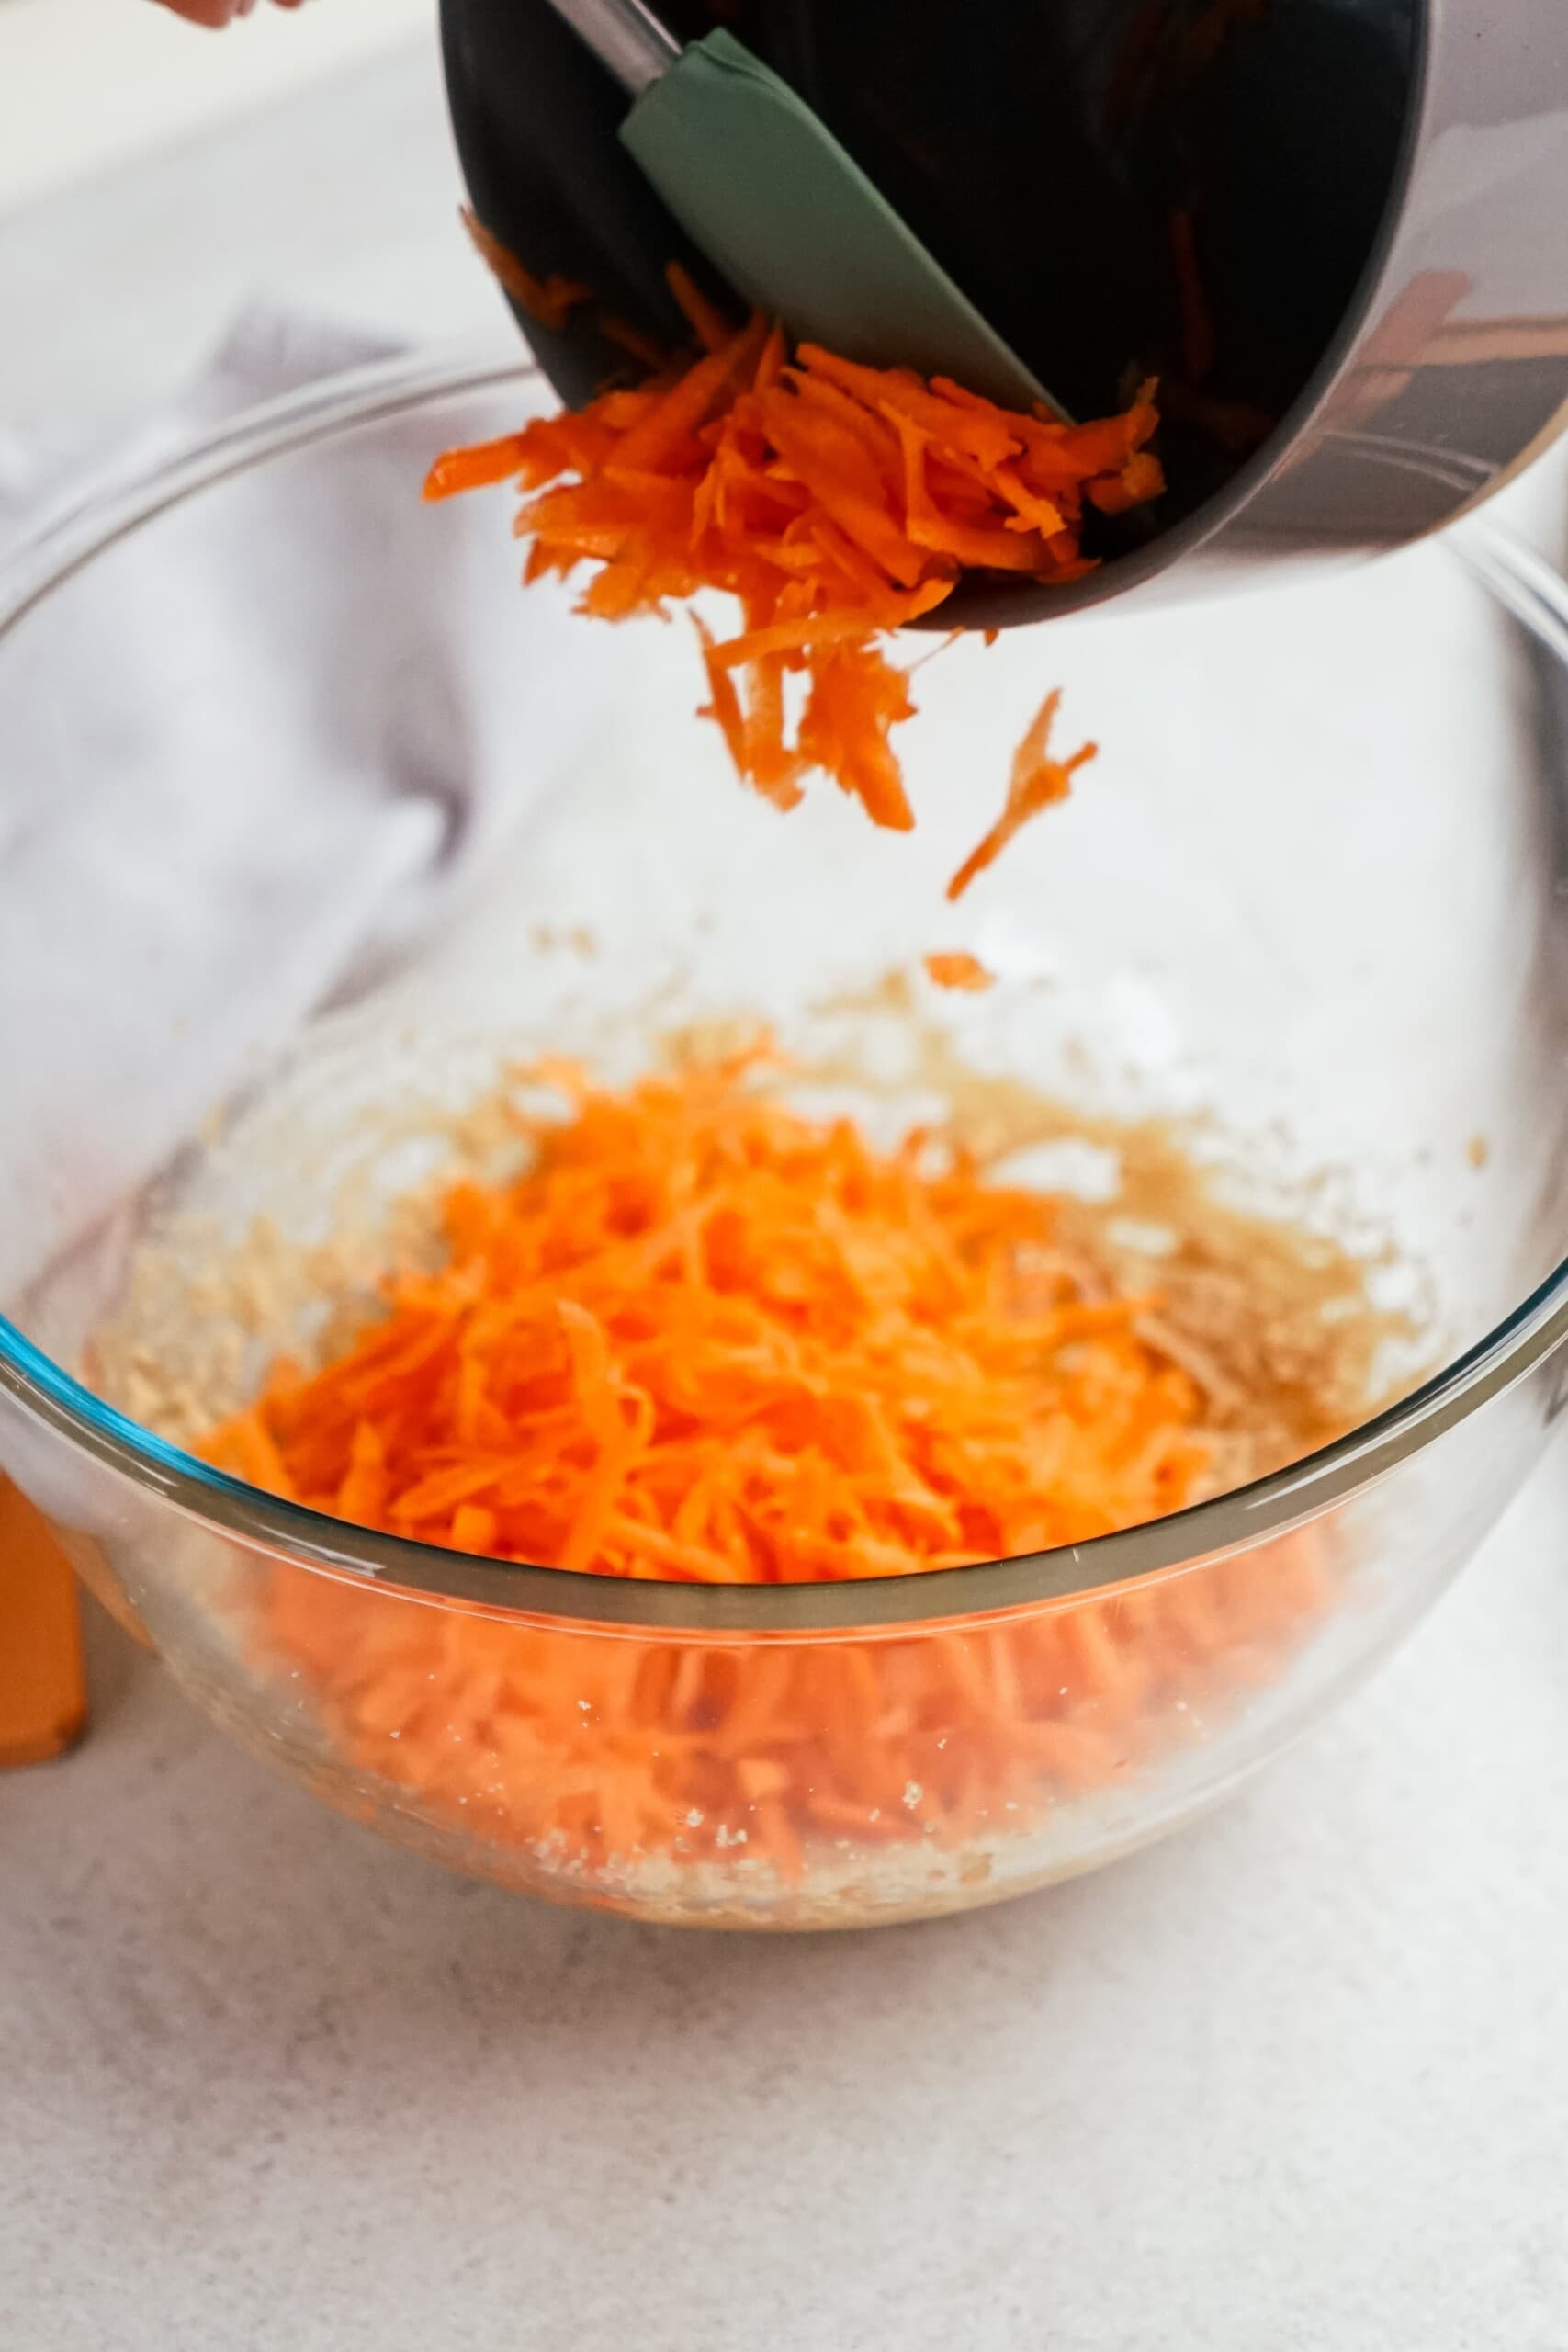 shredded carrots added to cookie mixture